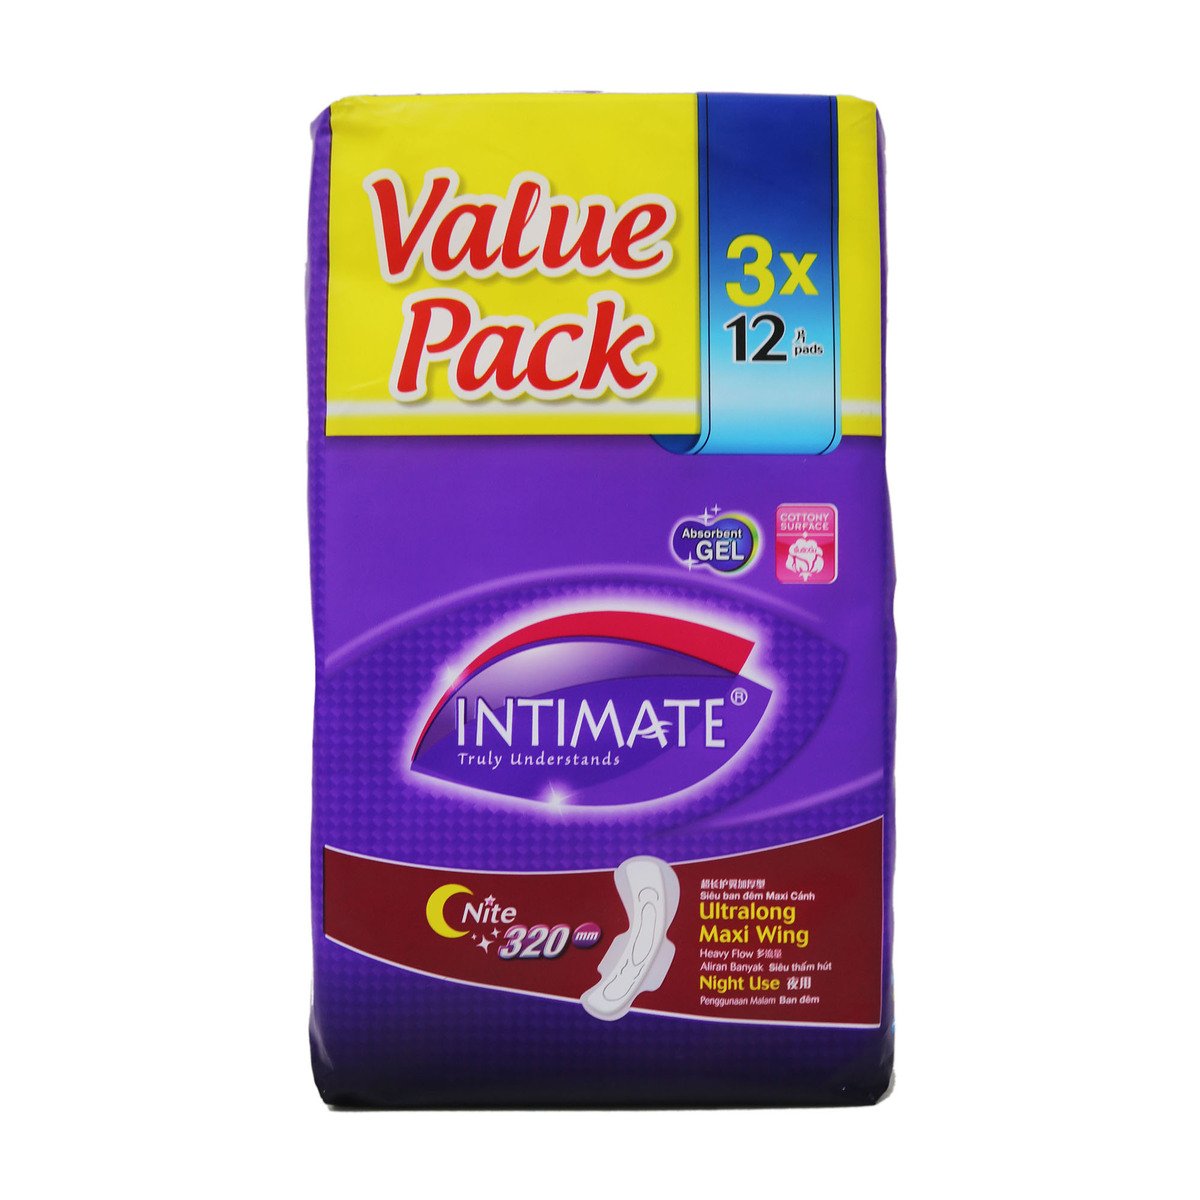 Intimate Night Long Maxi Wing Cottony Surface 320mm 3 x 12 Counts